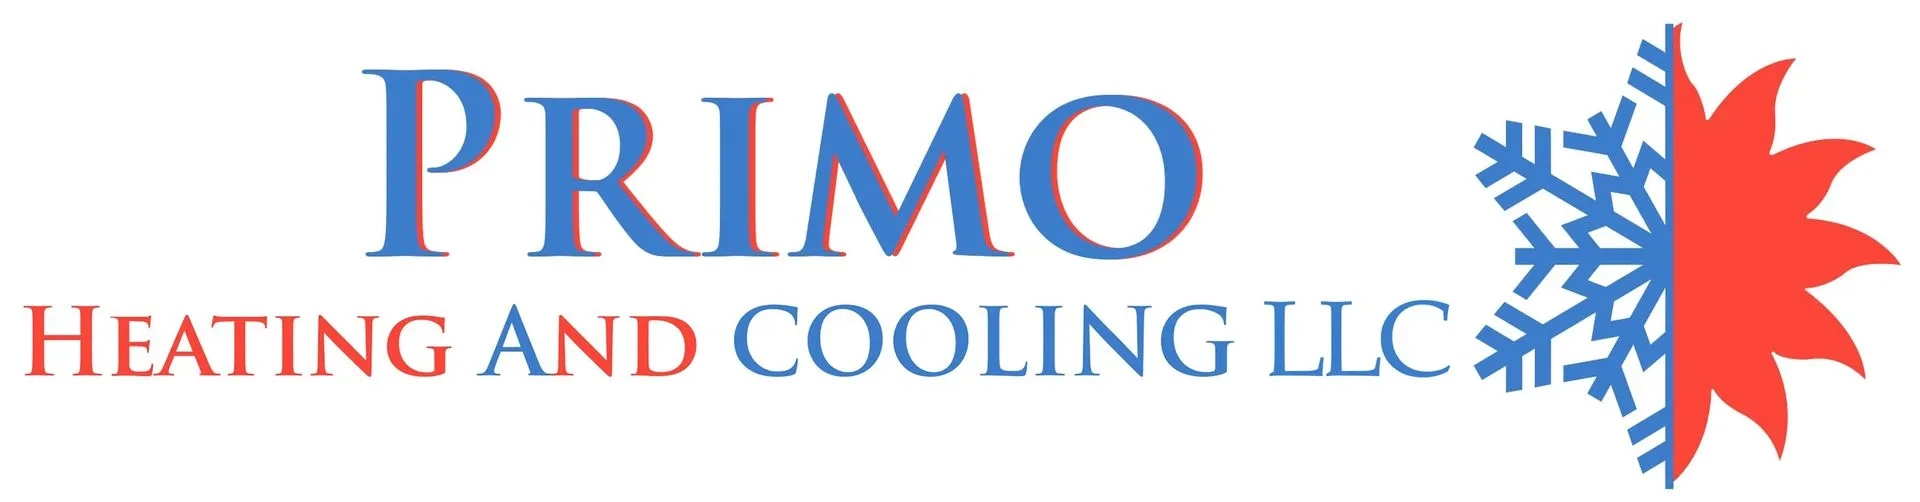 Primo Heating and Cooling LLC Logo